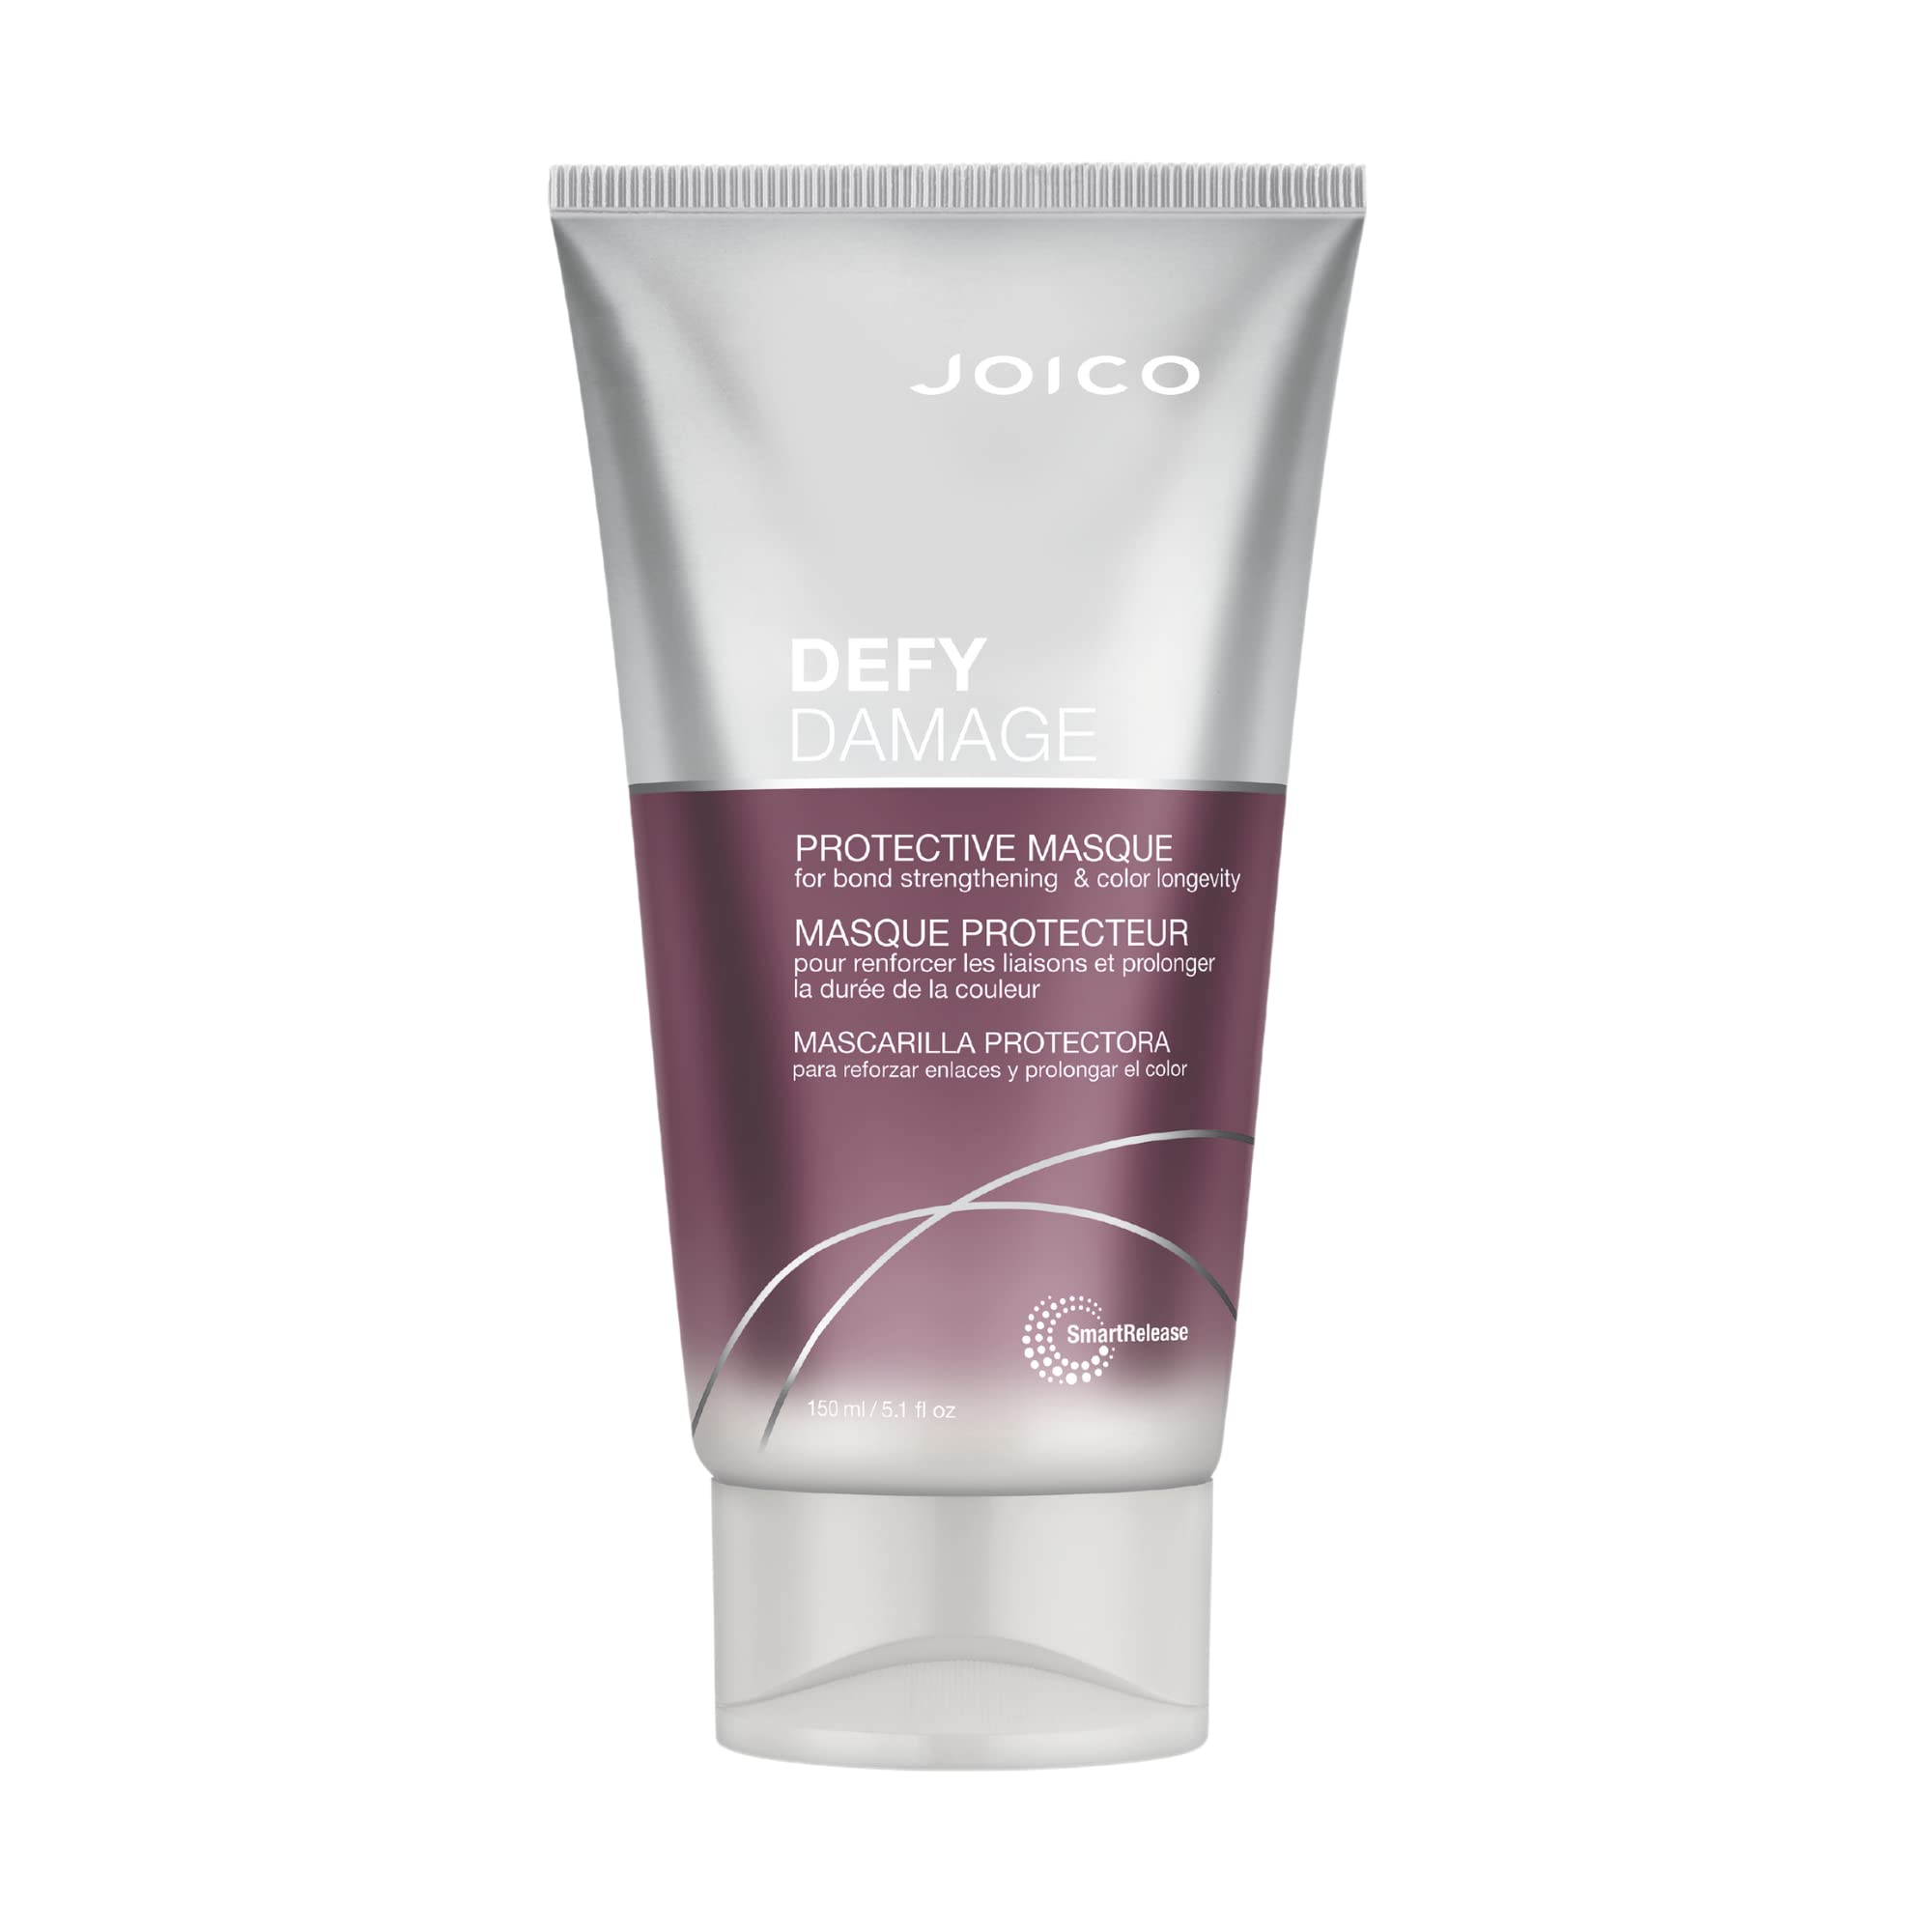 Joico Defy Damage Protective Masque | For Color-Treated Hair | Strengthen Bonds & Preserve Hair Color | With Moringa Seed Oil & Arginine